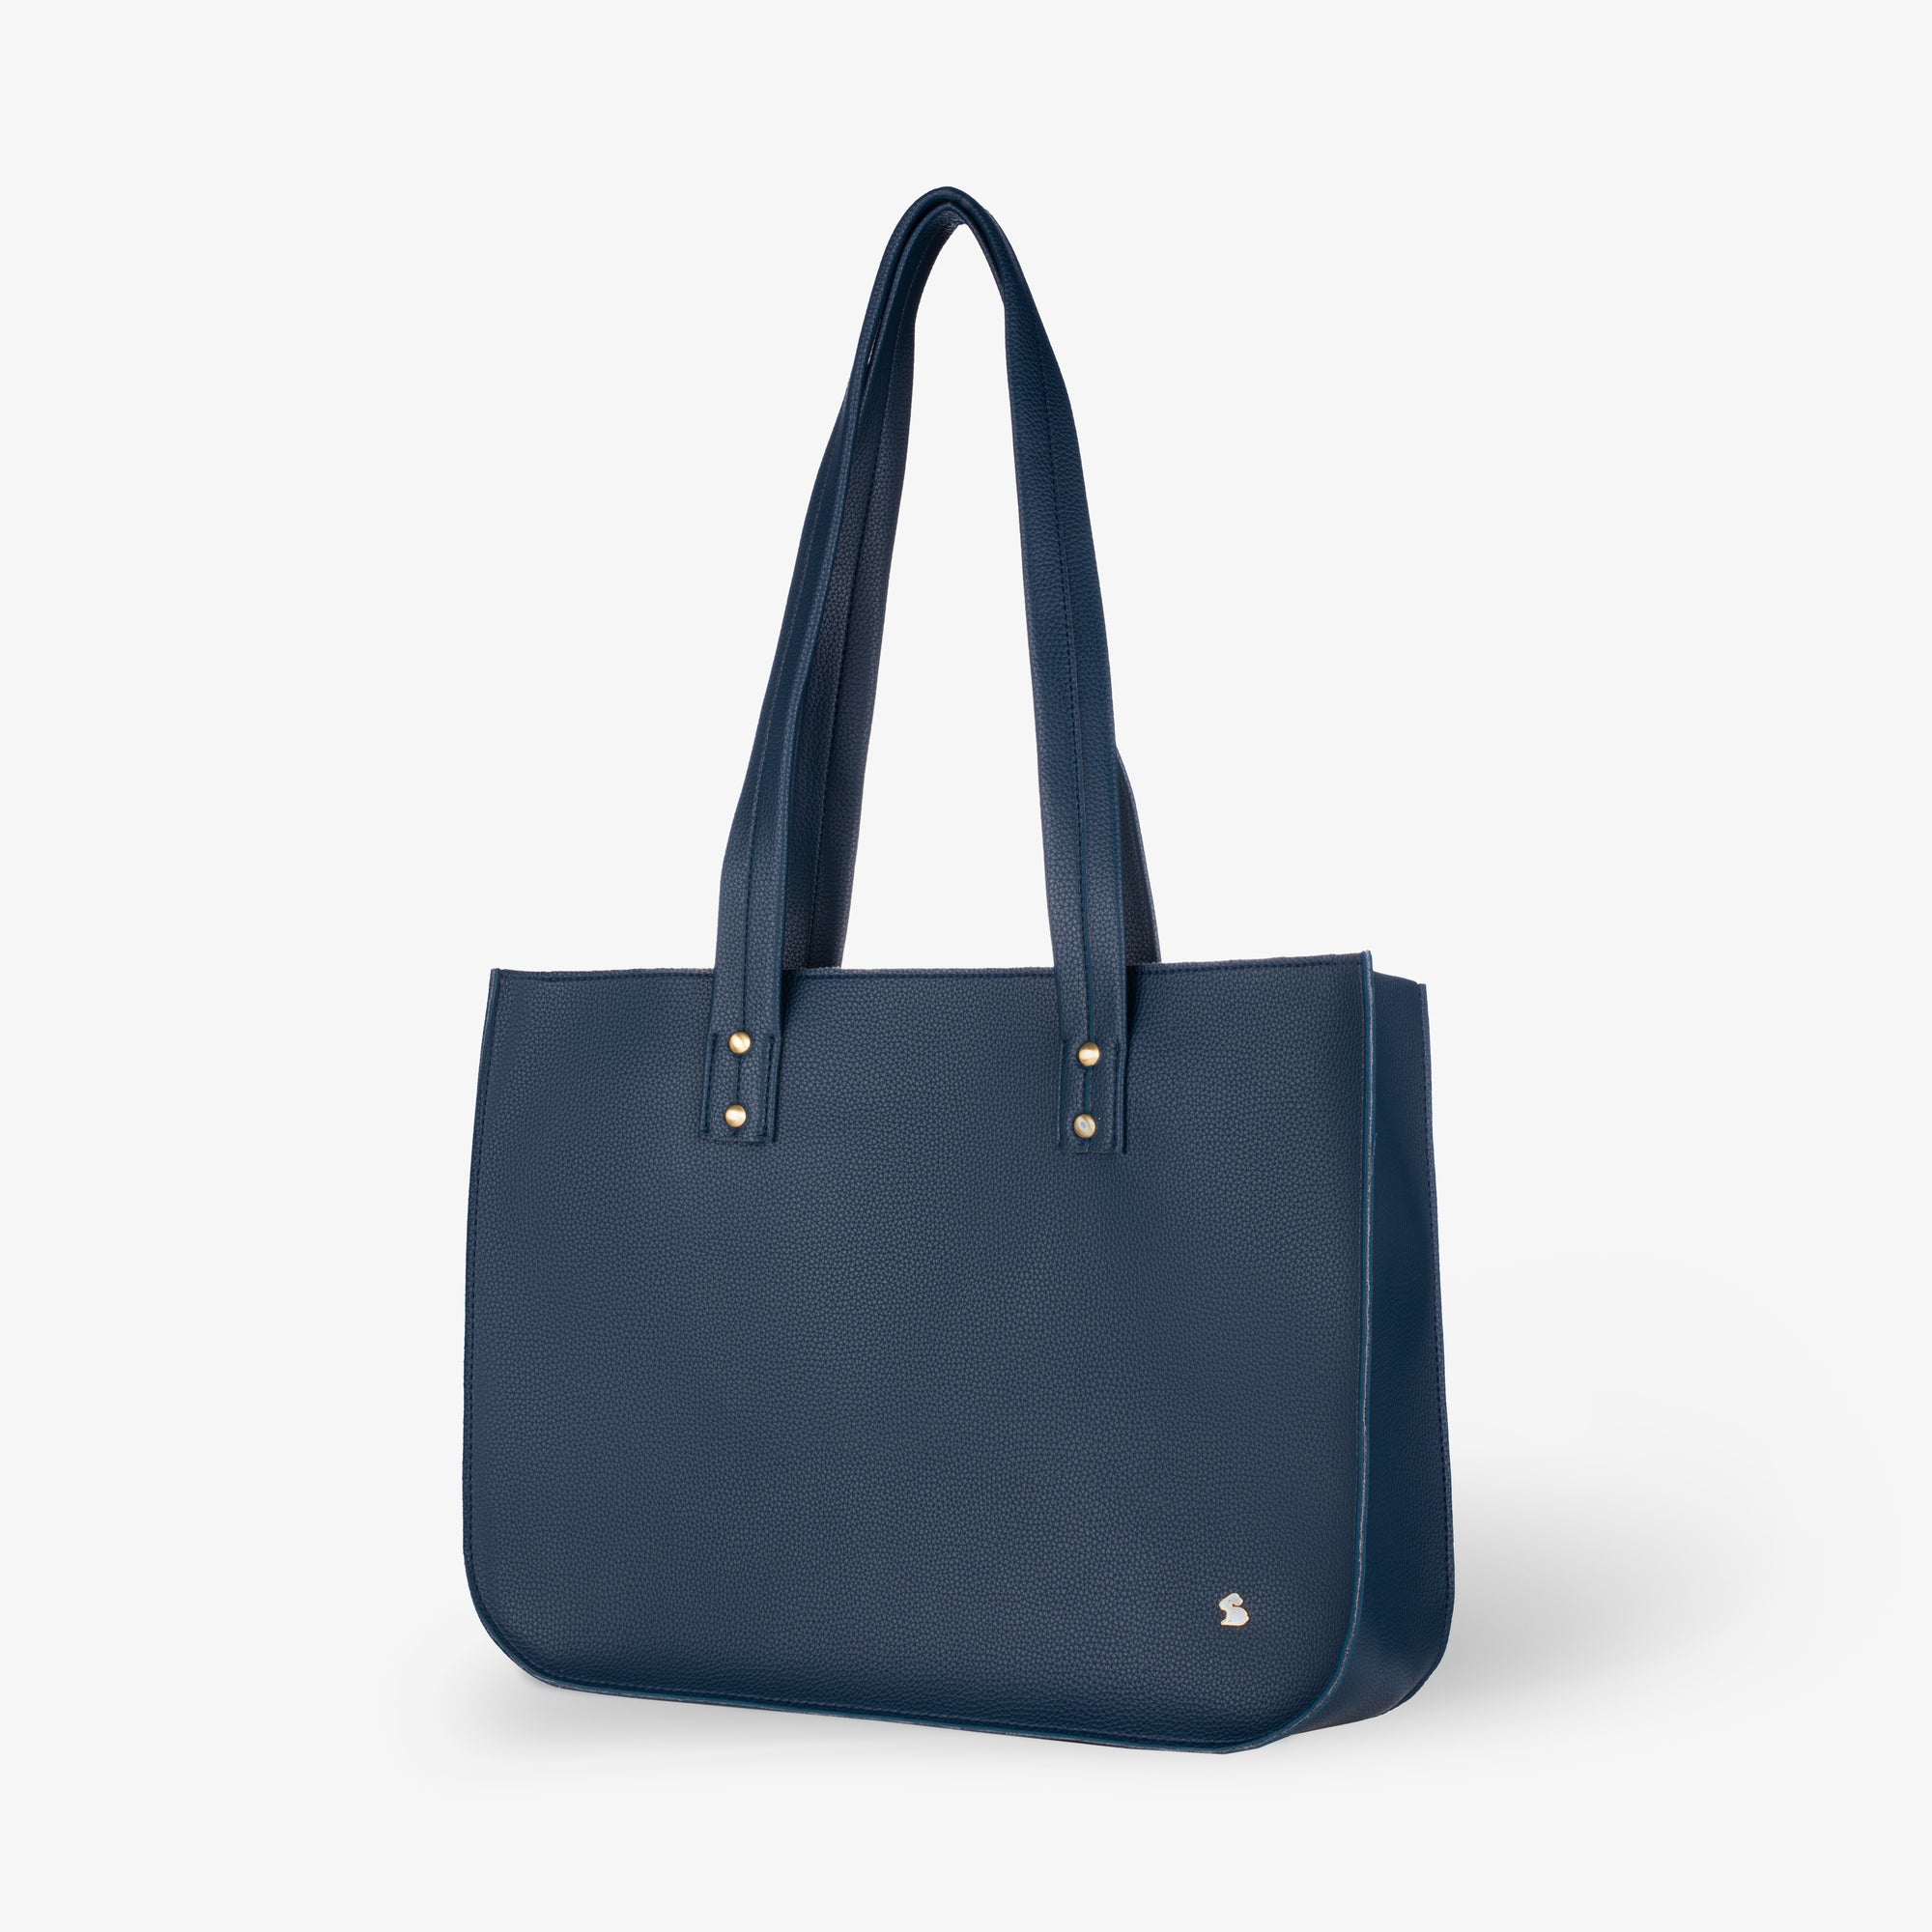 navy blue tote bags with zipper